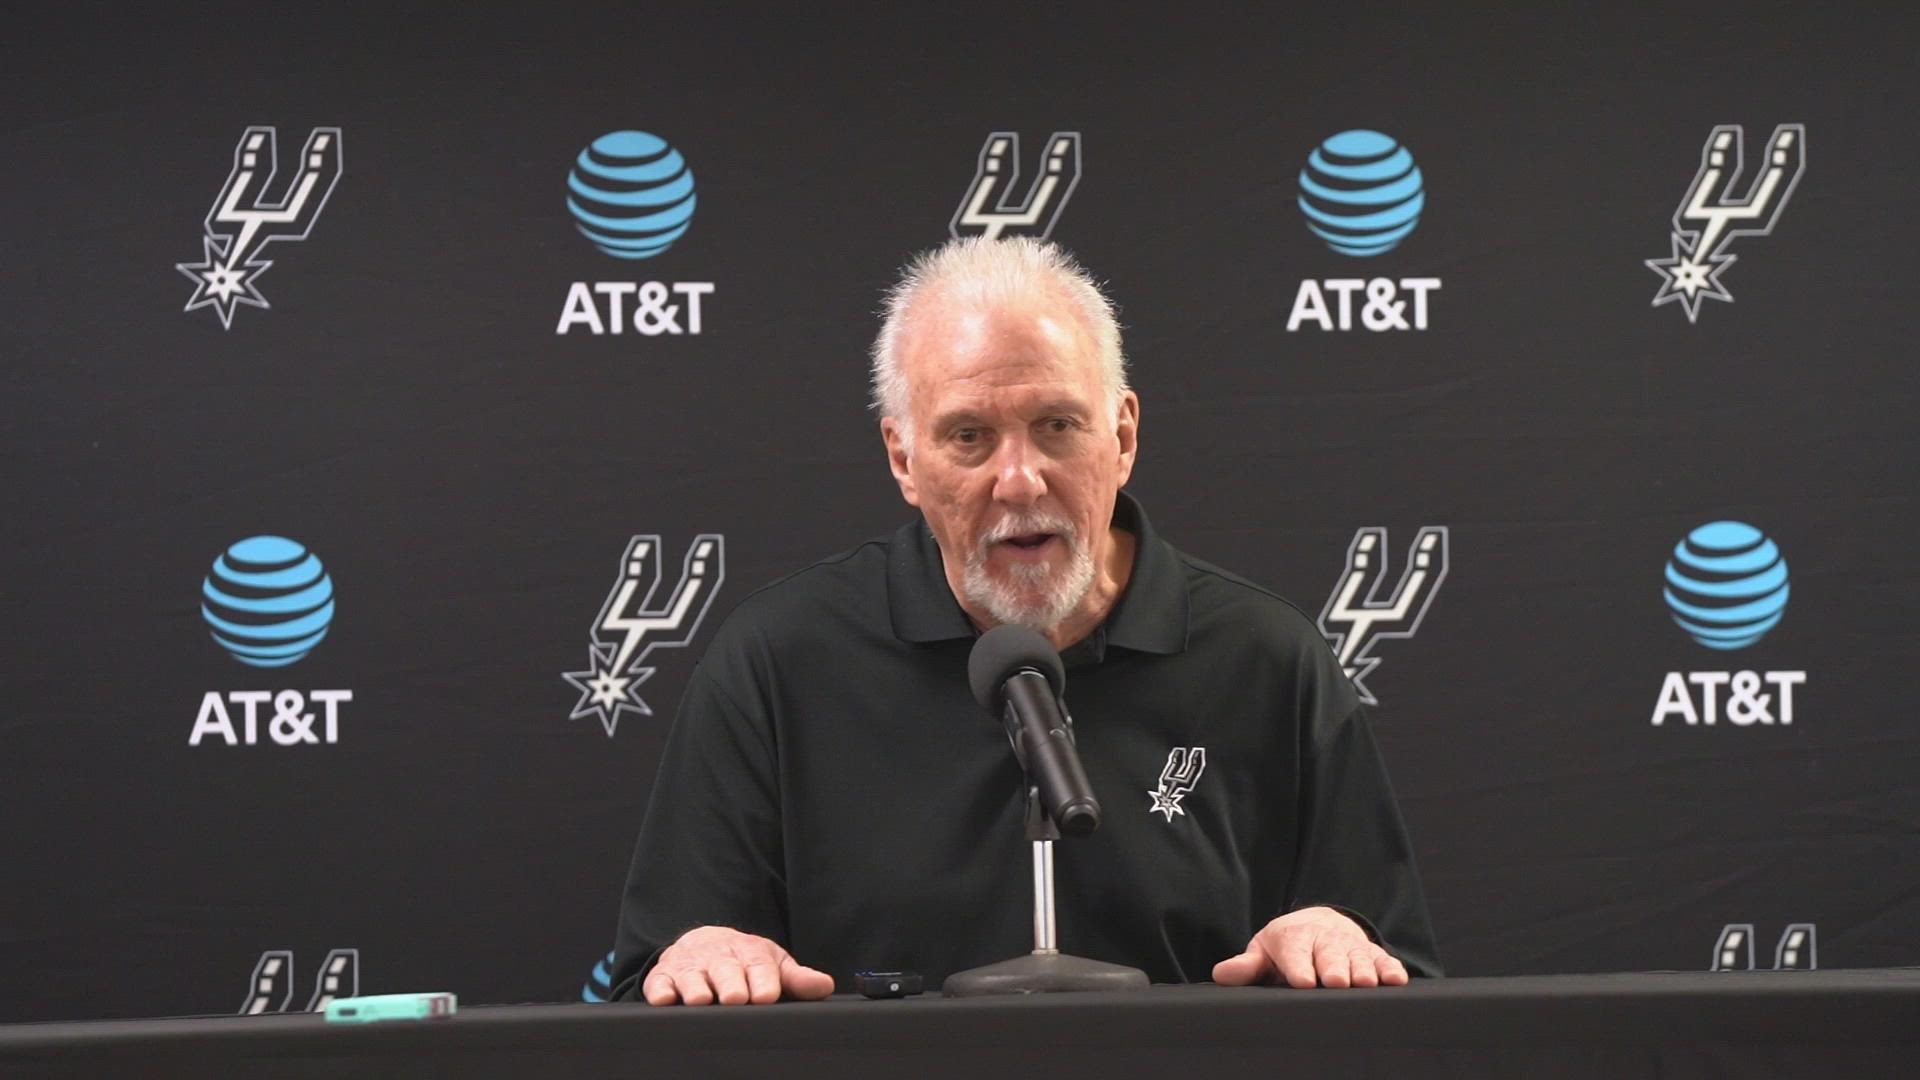 "They deserved the game, but I thought we played hard and did some good things," Popovich said, noting that his guys could learn from Toronto and the loss.